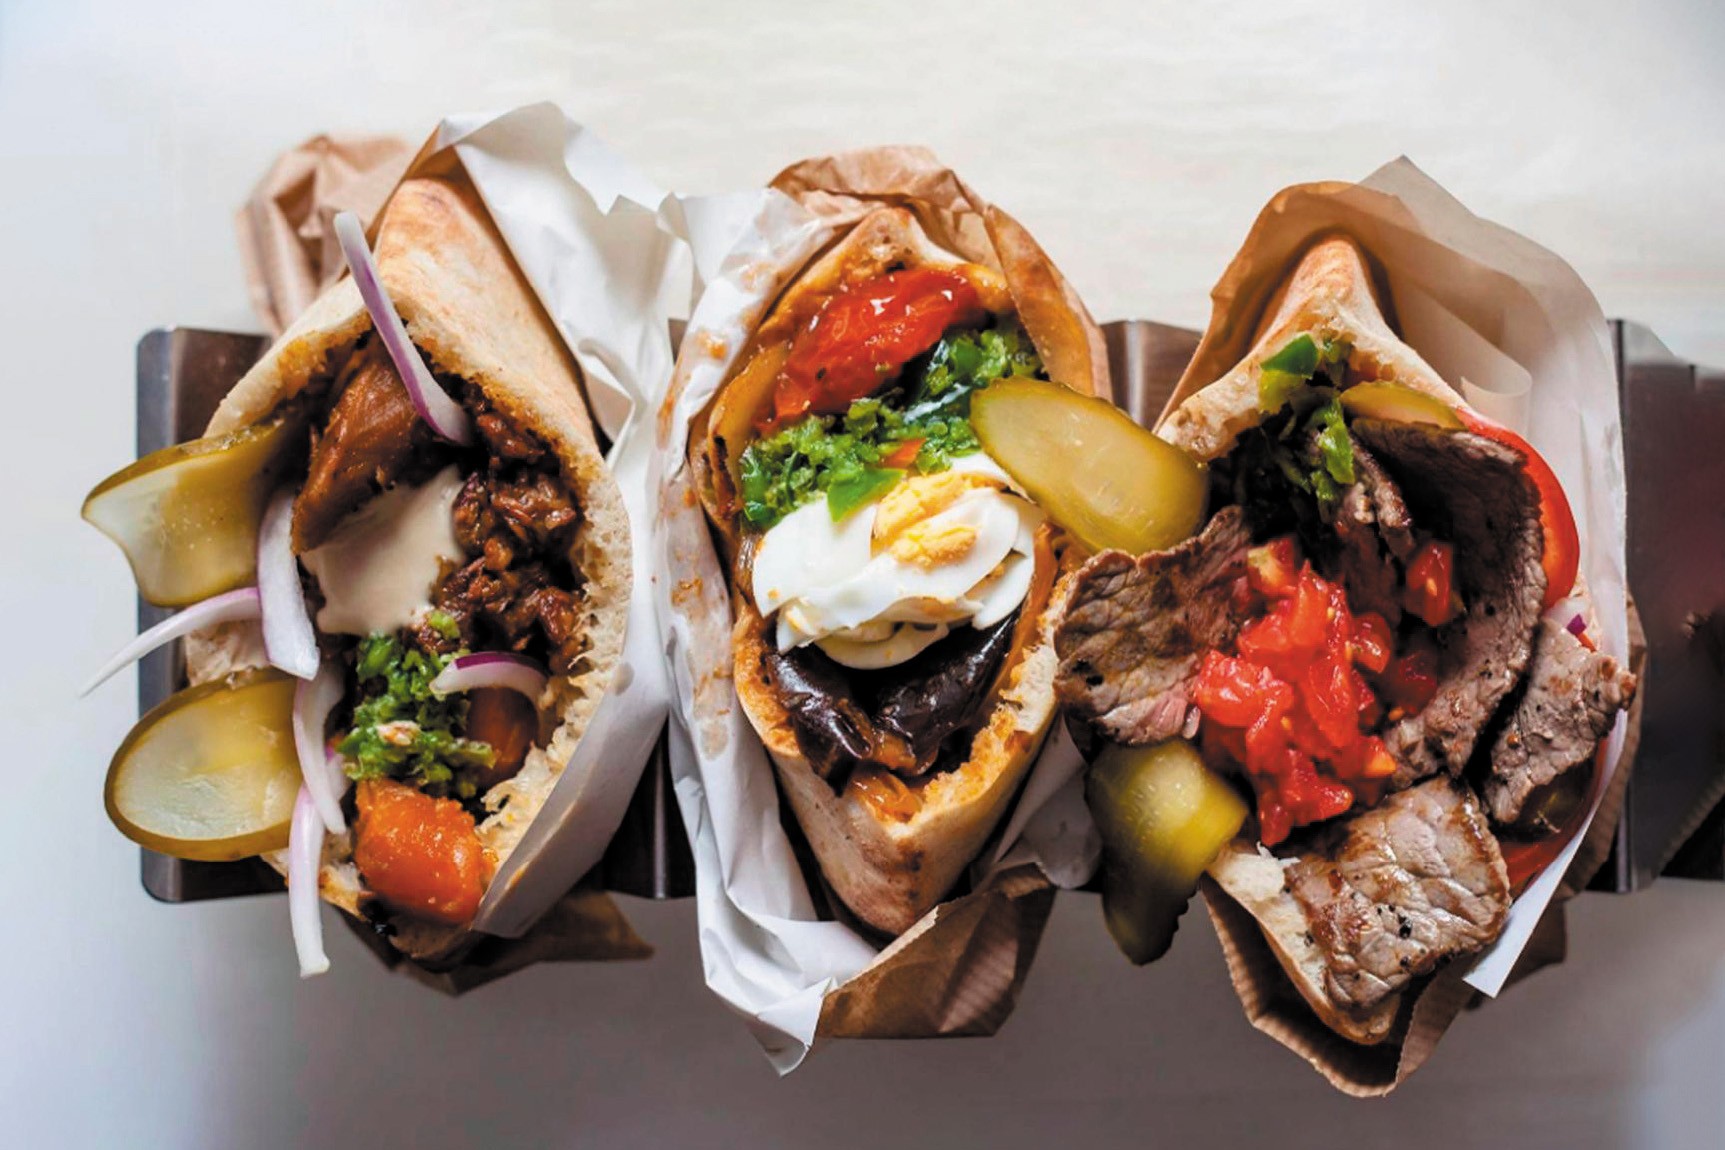 A selection of three pita entrees, with different toppings including pickles, sour cream, tomatoes, and peppers.